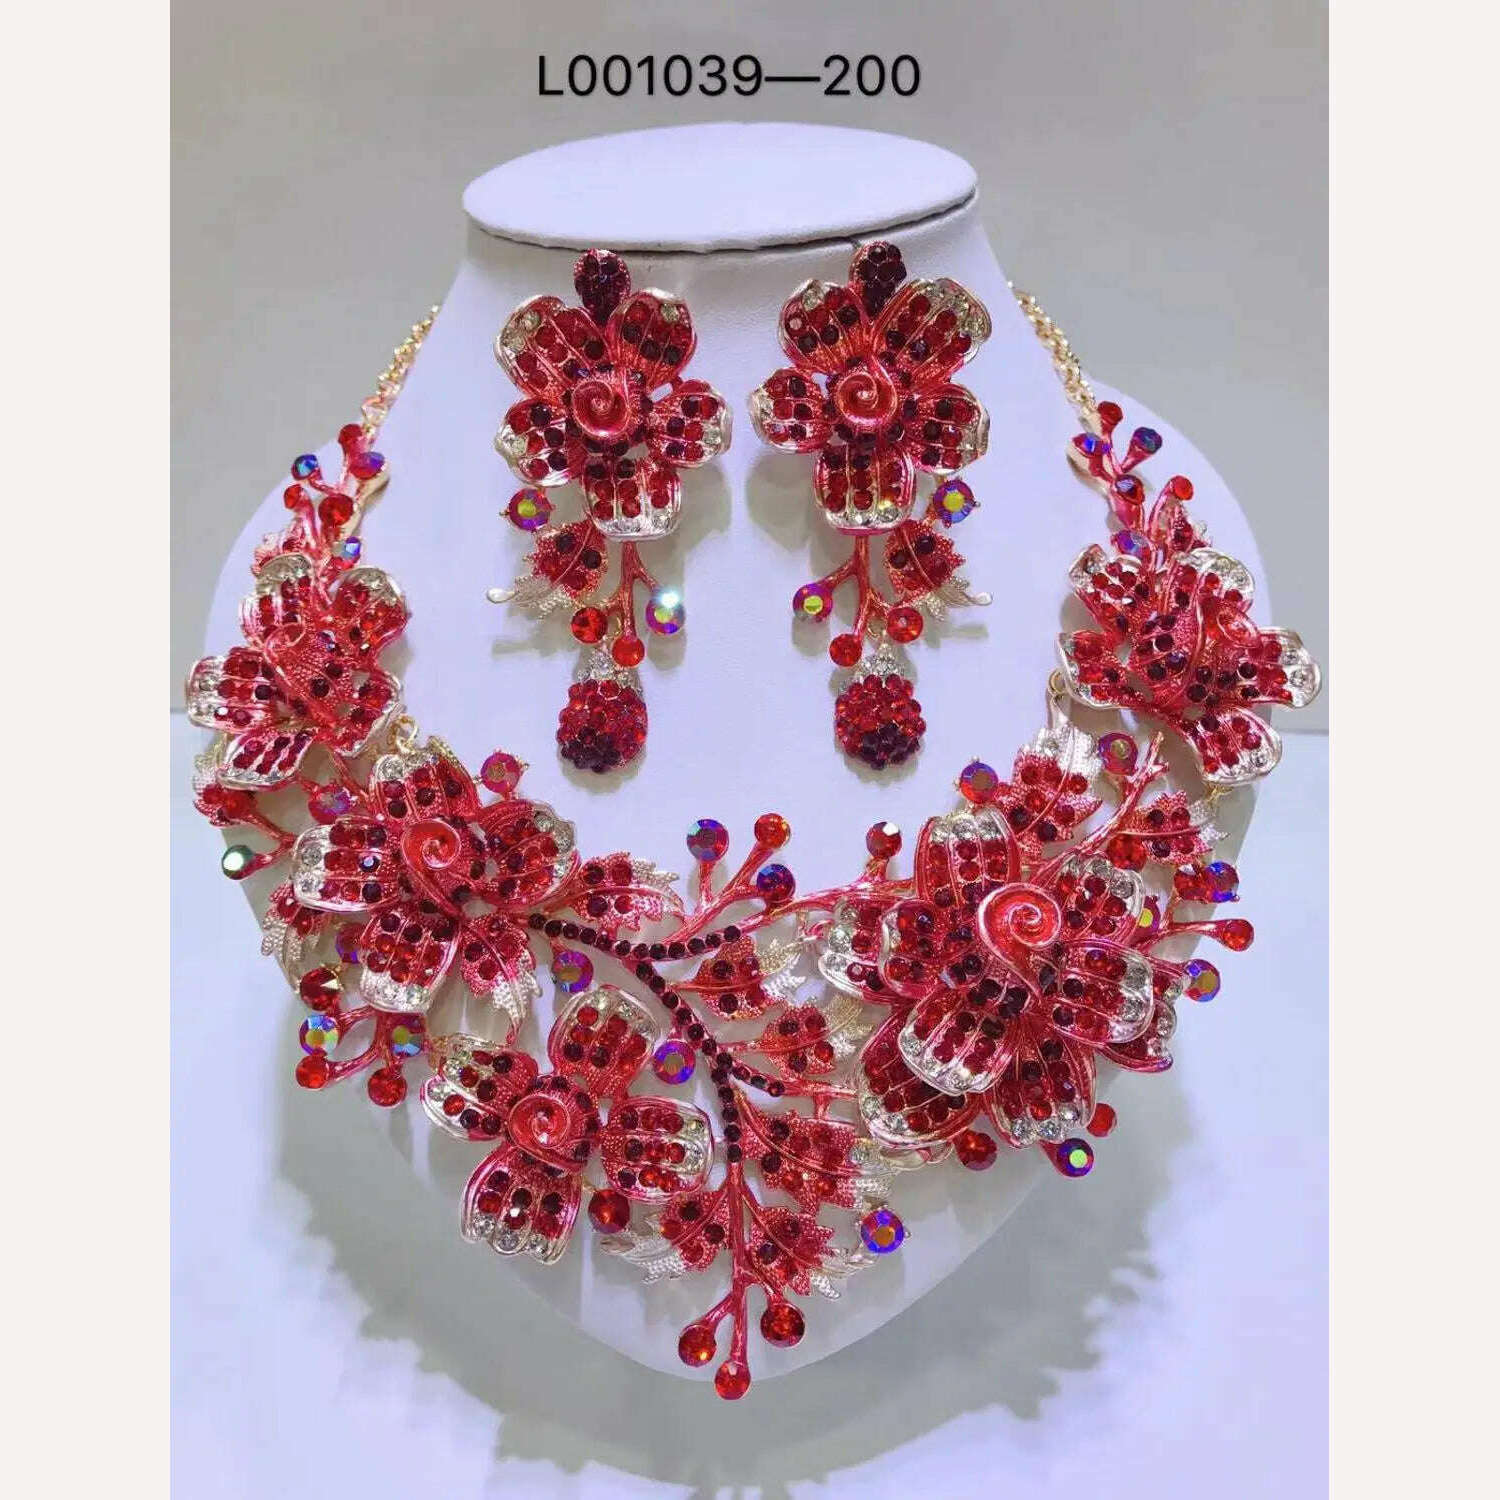 KIMLUD, Elegant Flowers Bridal Jewelry Sets Wedding Costume Necklace & Earrings Sets Shining Crystal Gold Color Jewellery For Brides, L007, KIMLUD Women's Clothes